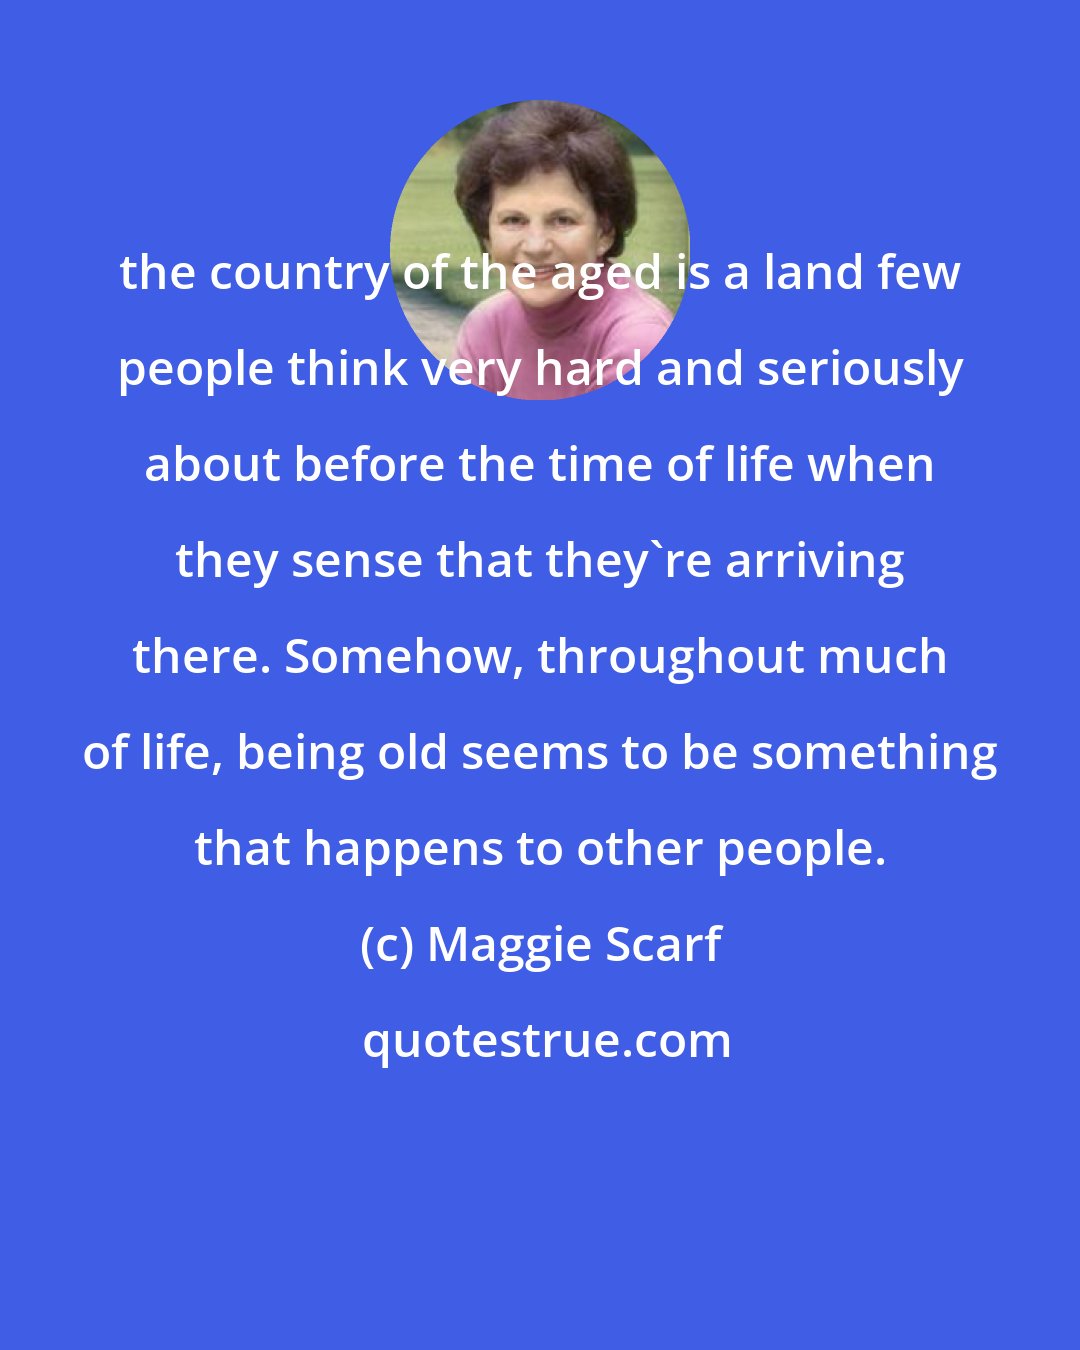 Maggie Scarf: the country of the aged is a land few people think very hard and seriously about before the time of life when they sense that they're arriving there. Somehow, throughout much of life, being old seems to be something that happens to other people.